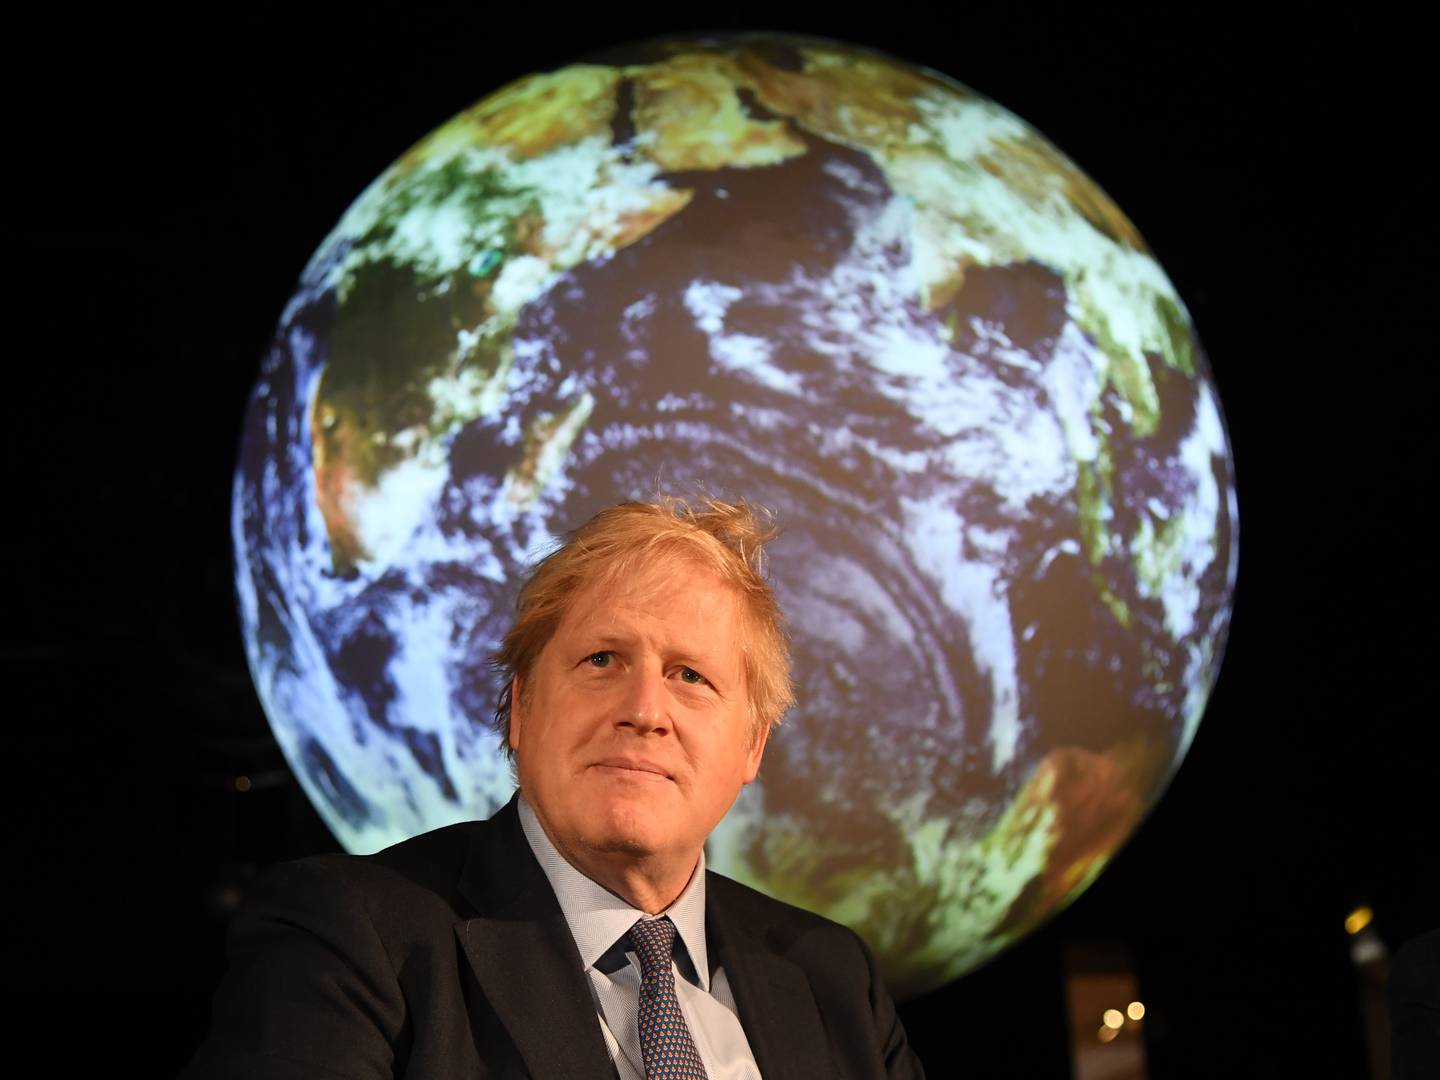 Boris Johnson attends the launch of the Cop26 Summit in February last year. Getty Images